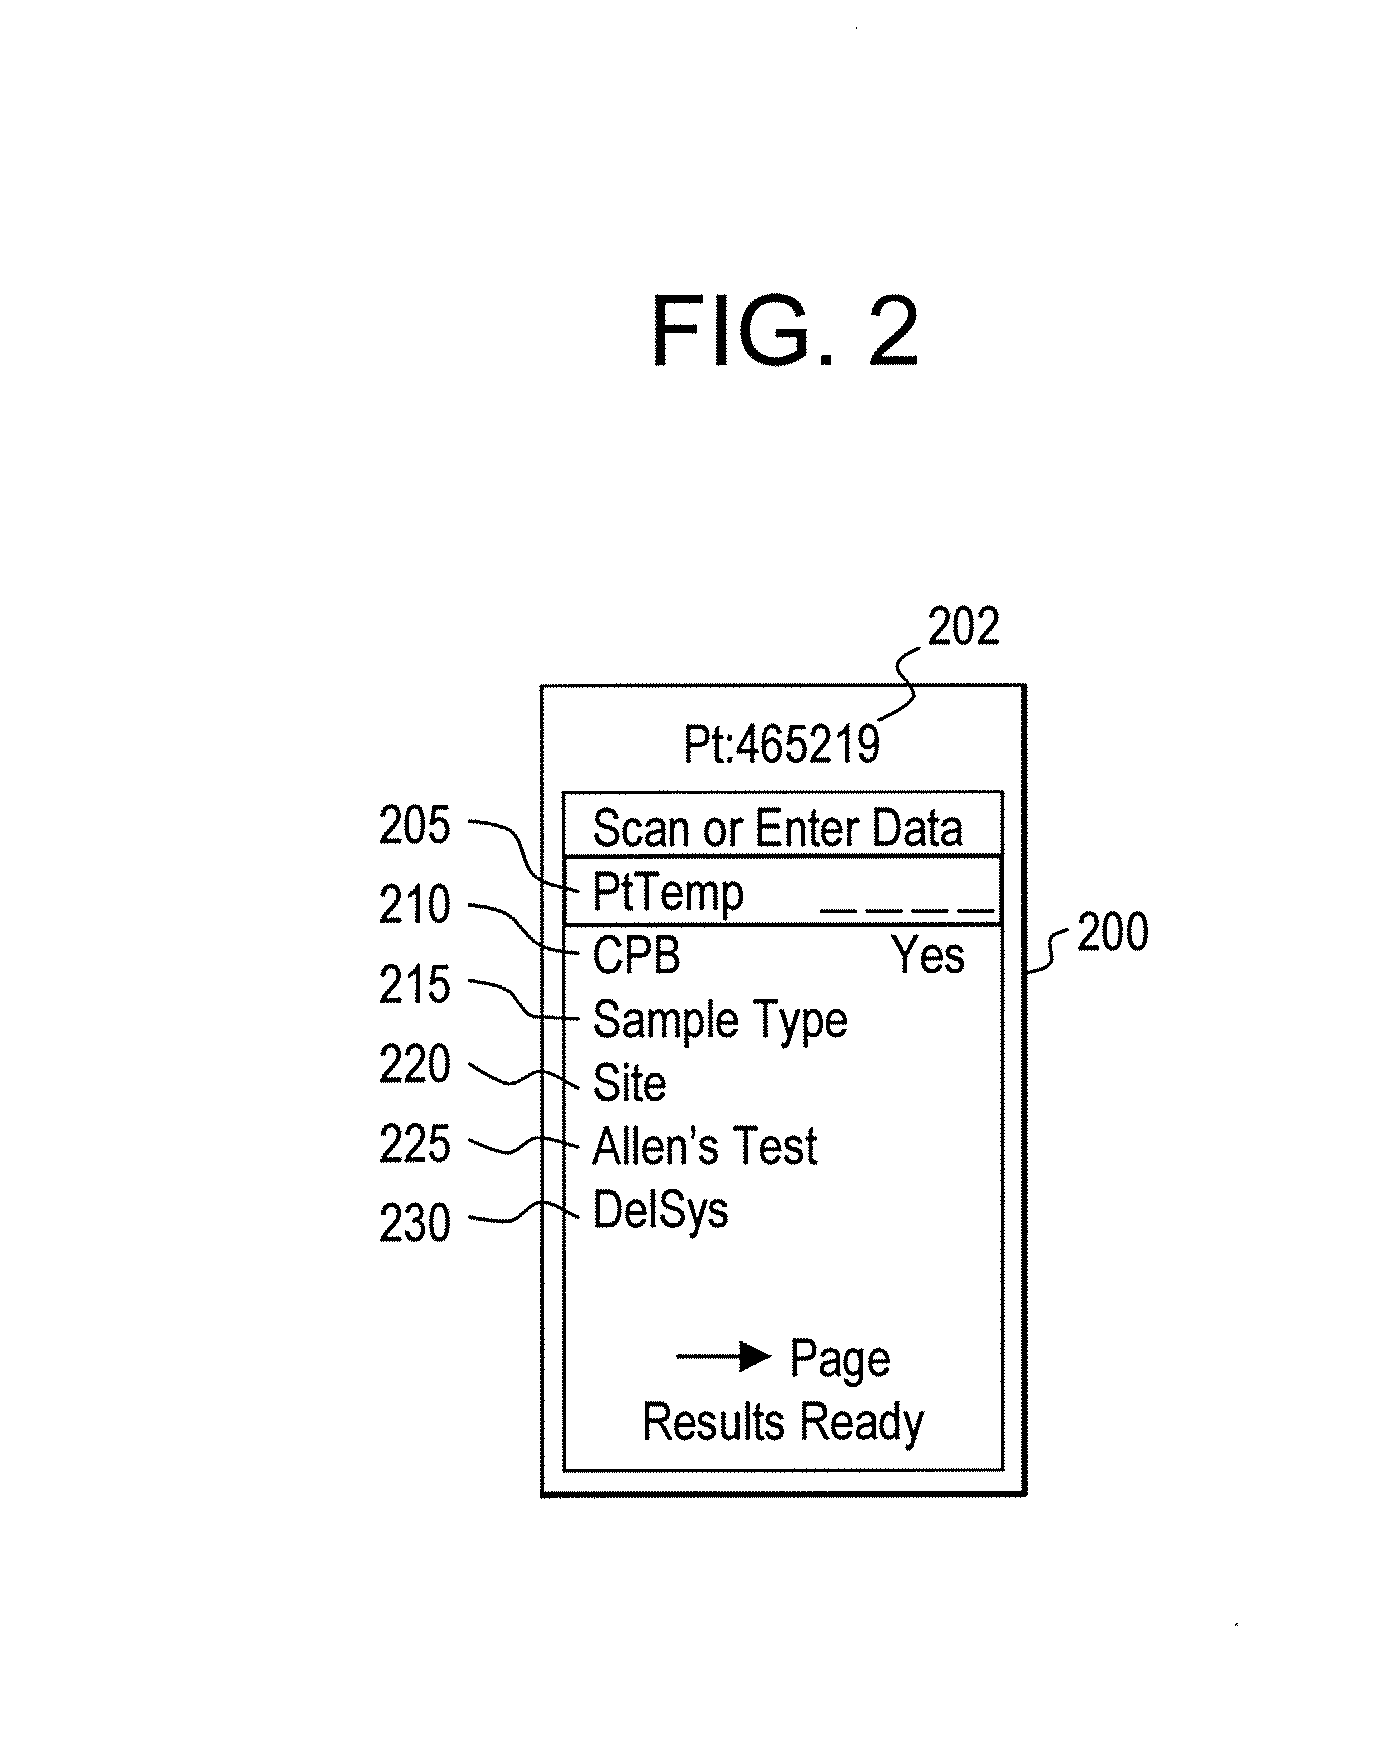 Medical data acquisition and patient management system and method